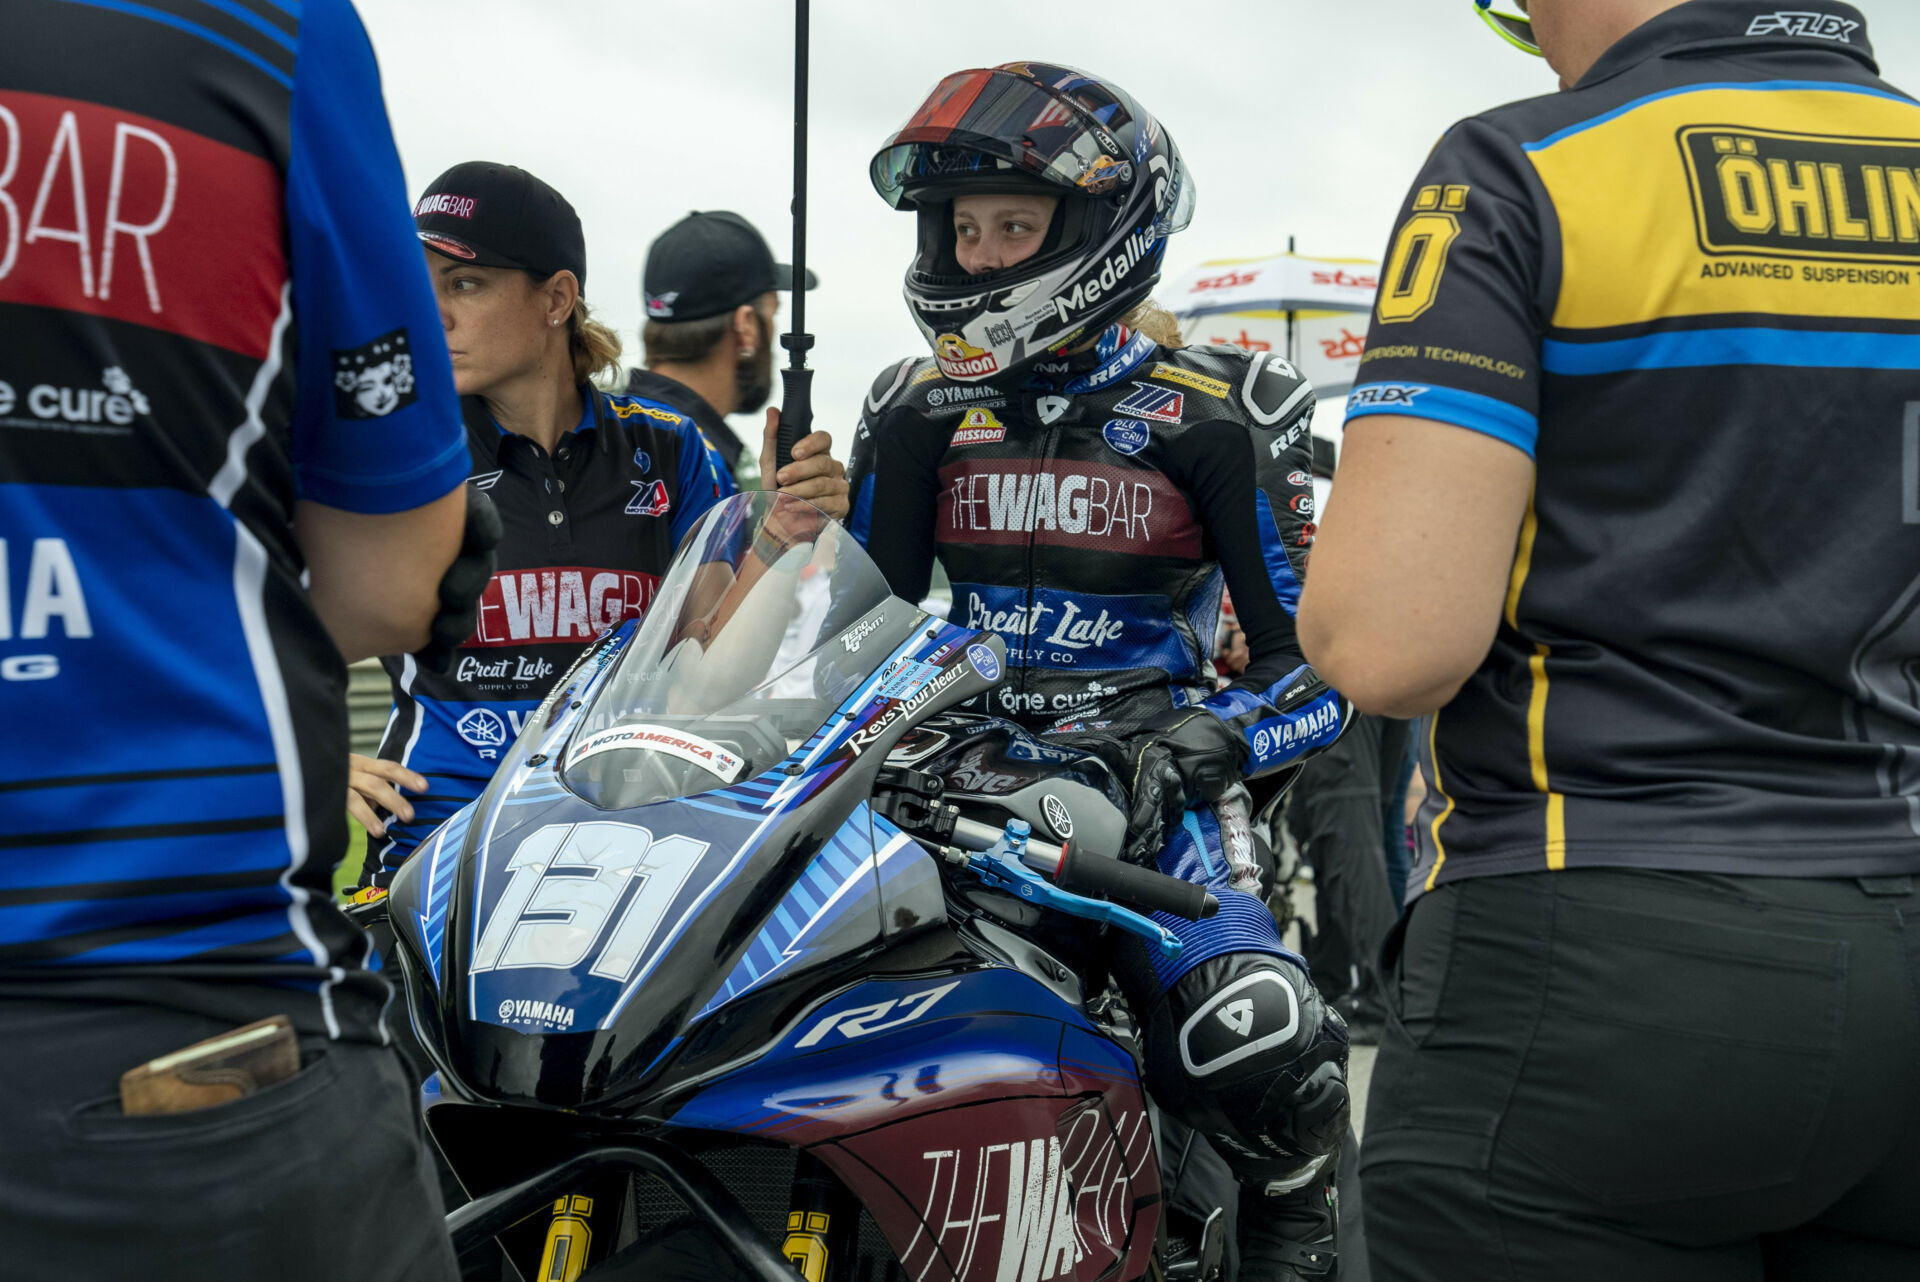 Follow MP13 Racing, Team Owner Melissa Paris, and young riders Aiden Sneed and Kayla Yaakov as they take on the 2023 MotoAmerica motorcycle racing season. In Episode Four, MP13 Racing welcomes Kayla back from injury for her career-first MotoAmerica Twins Cup races and Aiden Sneed continues to ride his Yamaha YZF-R3 against all the Kawasaki Ninja 400s in MotoAmerica Junior Cup, at Barber Motorsports Park.